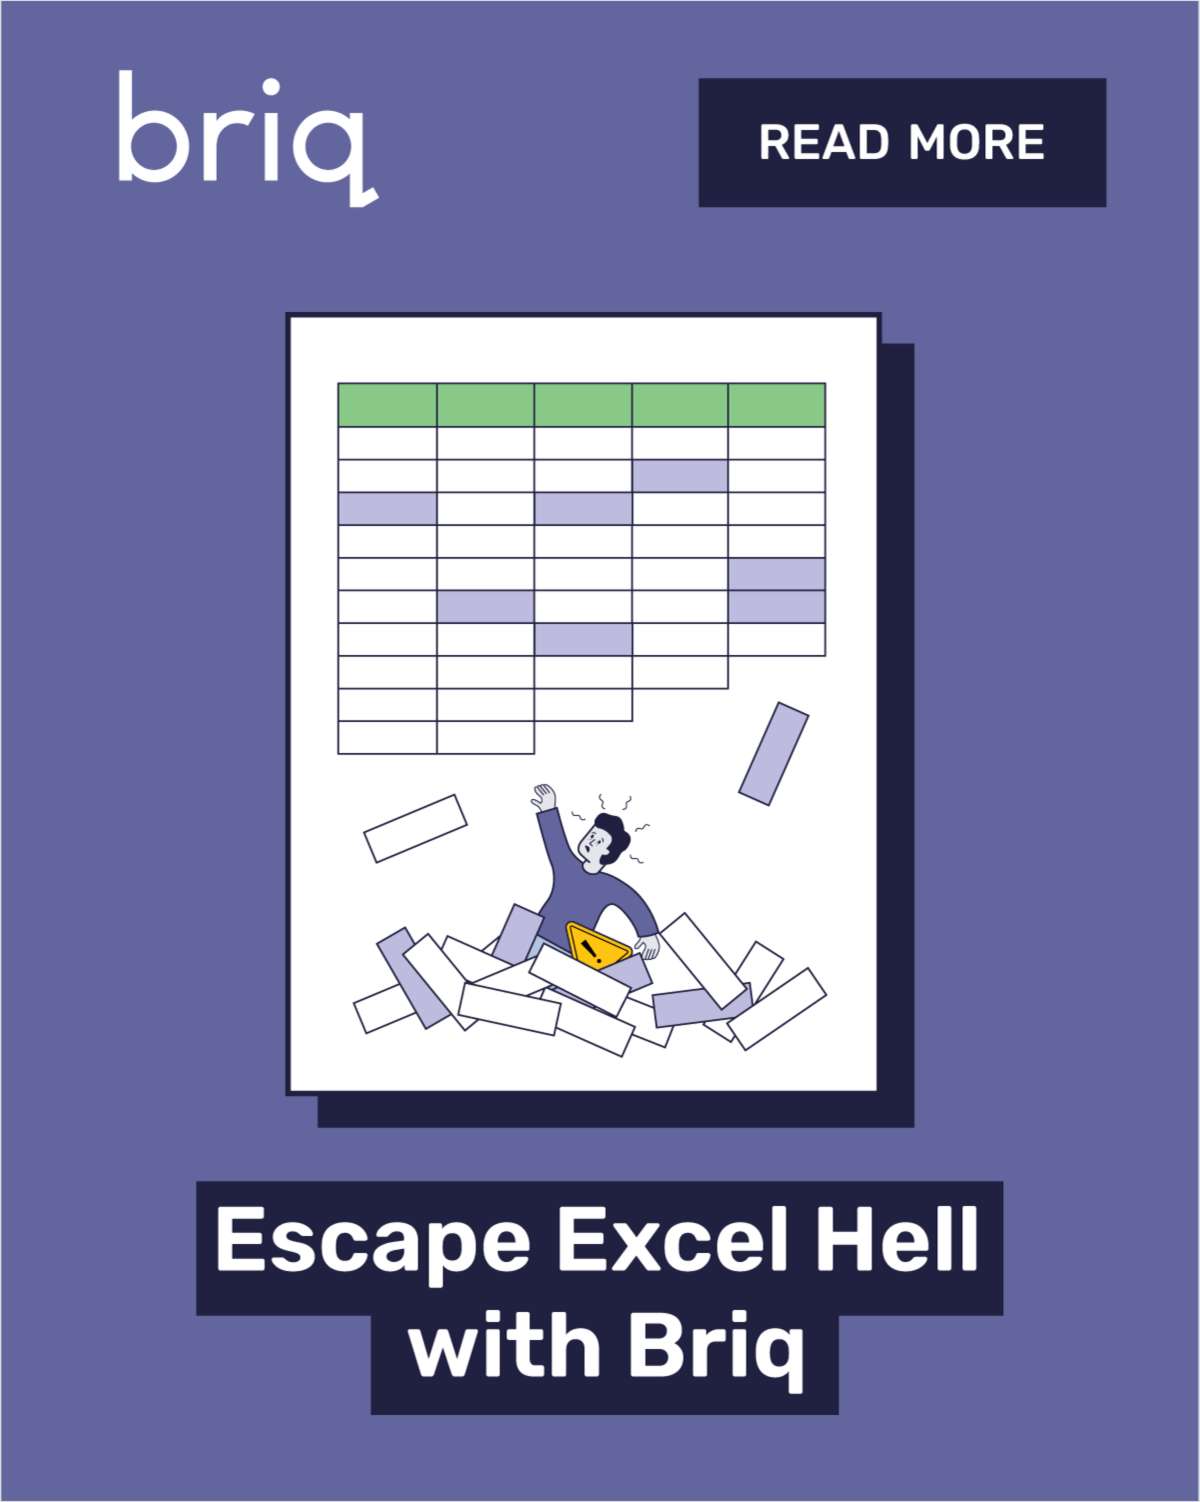 Escape from the EXCEL HELL!